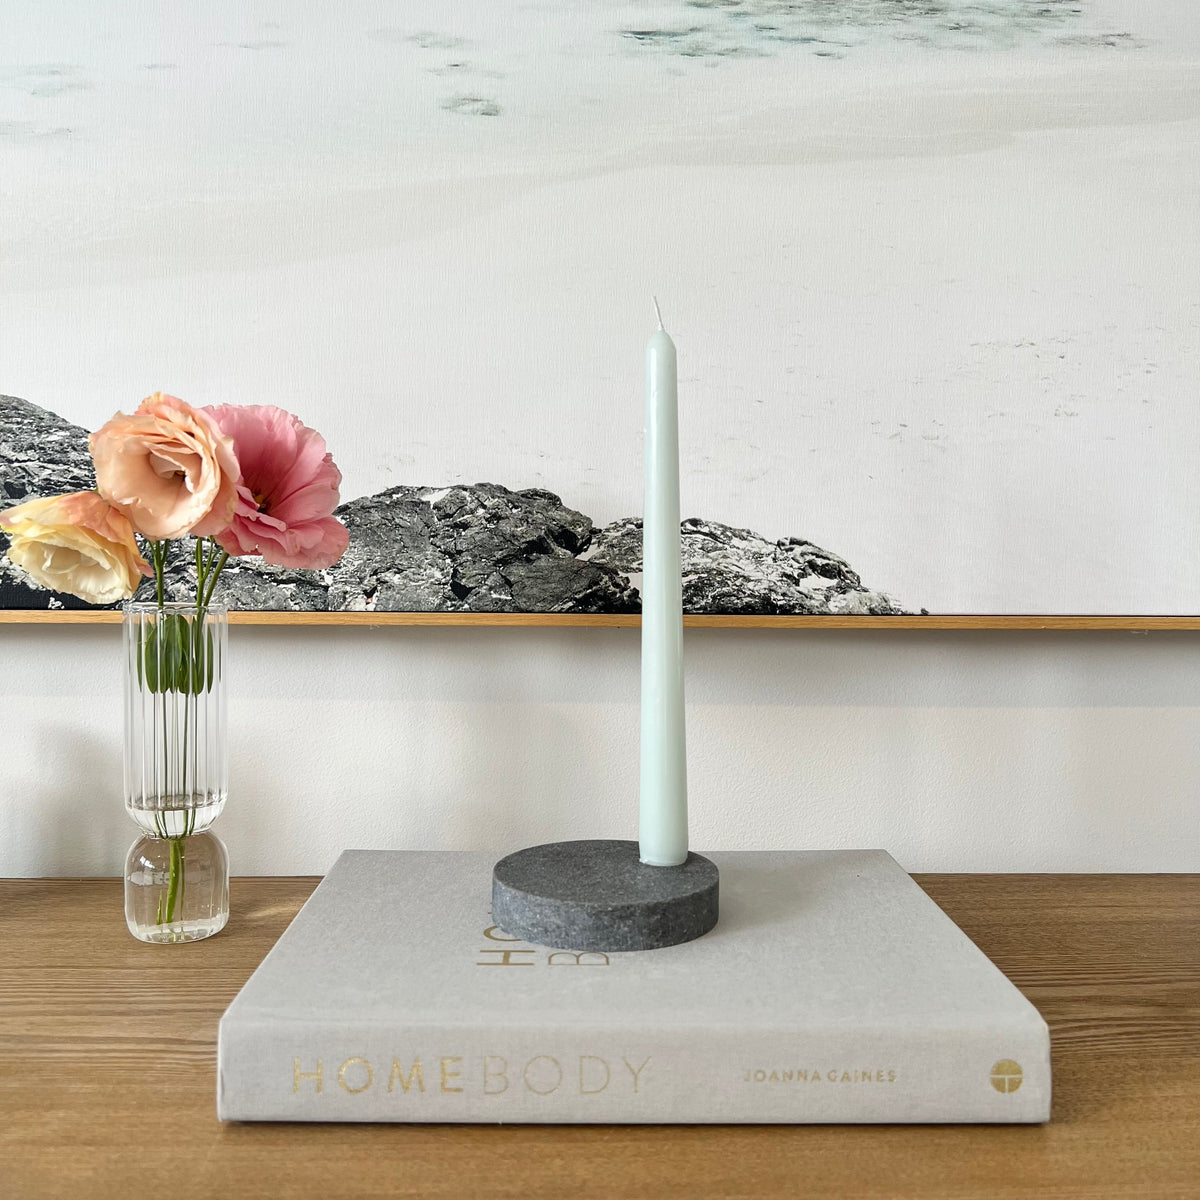 Quartz Round Single Candle Holder in Caesarstone Rugged Concrete created by Aureliia Collection. Styled with sage pillar candle. This candle holder has dramatic gradients of robust greys, flashed with white-haze patinas and accentuated with industrial-inspired imperfections. The perfect home decor item.